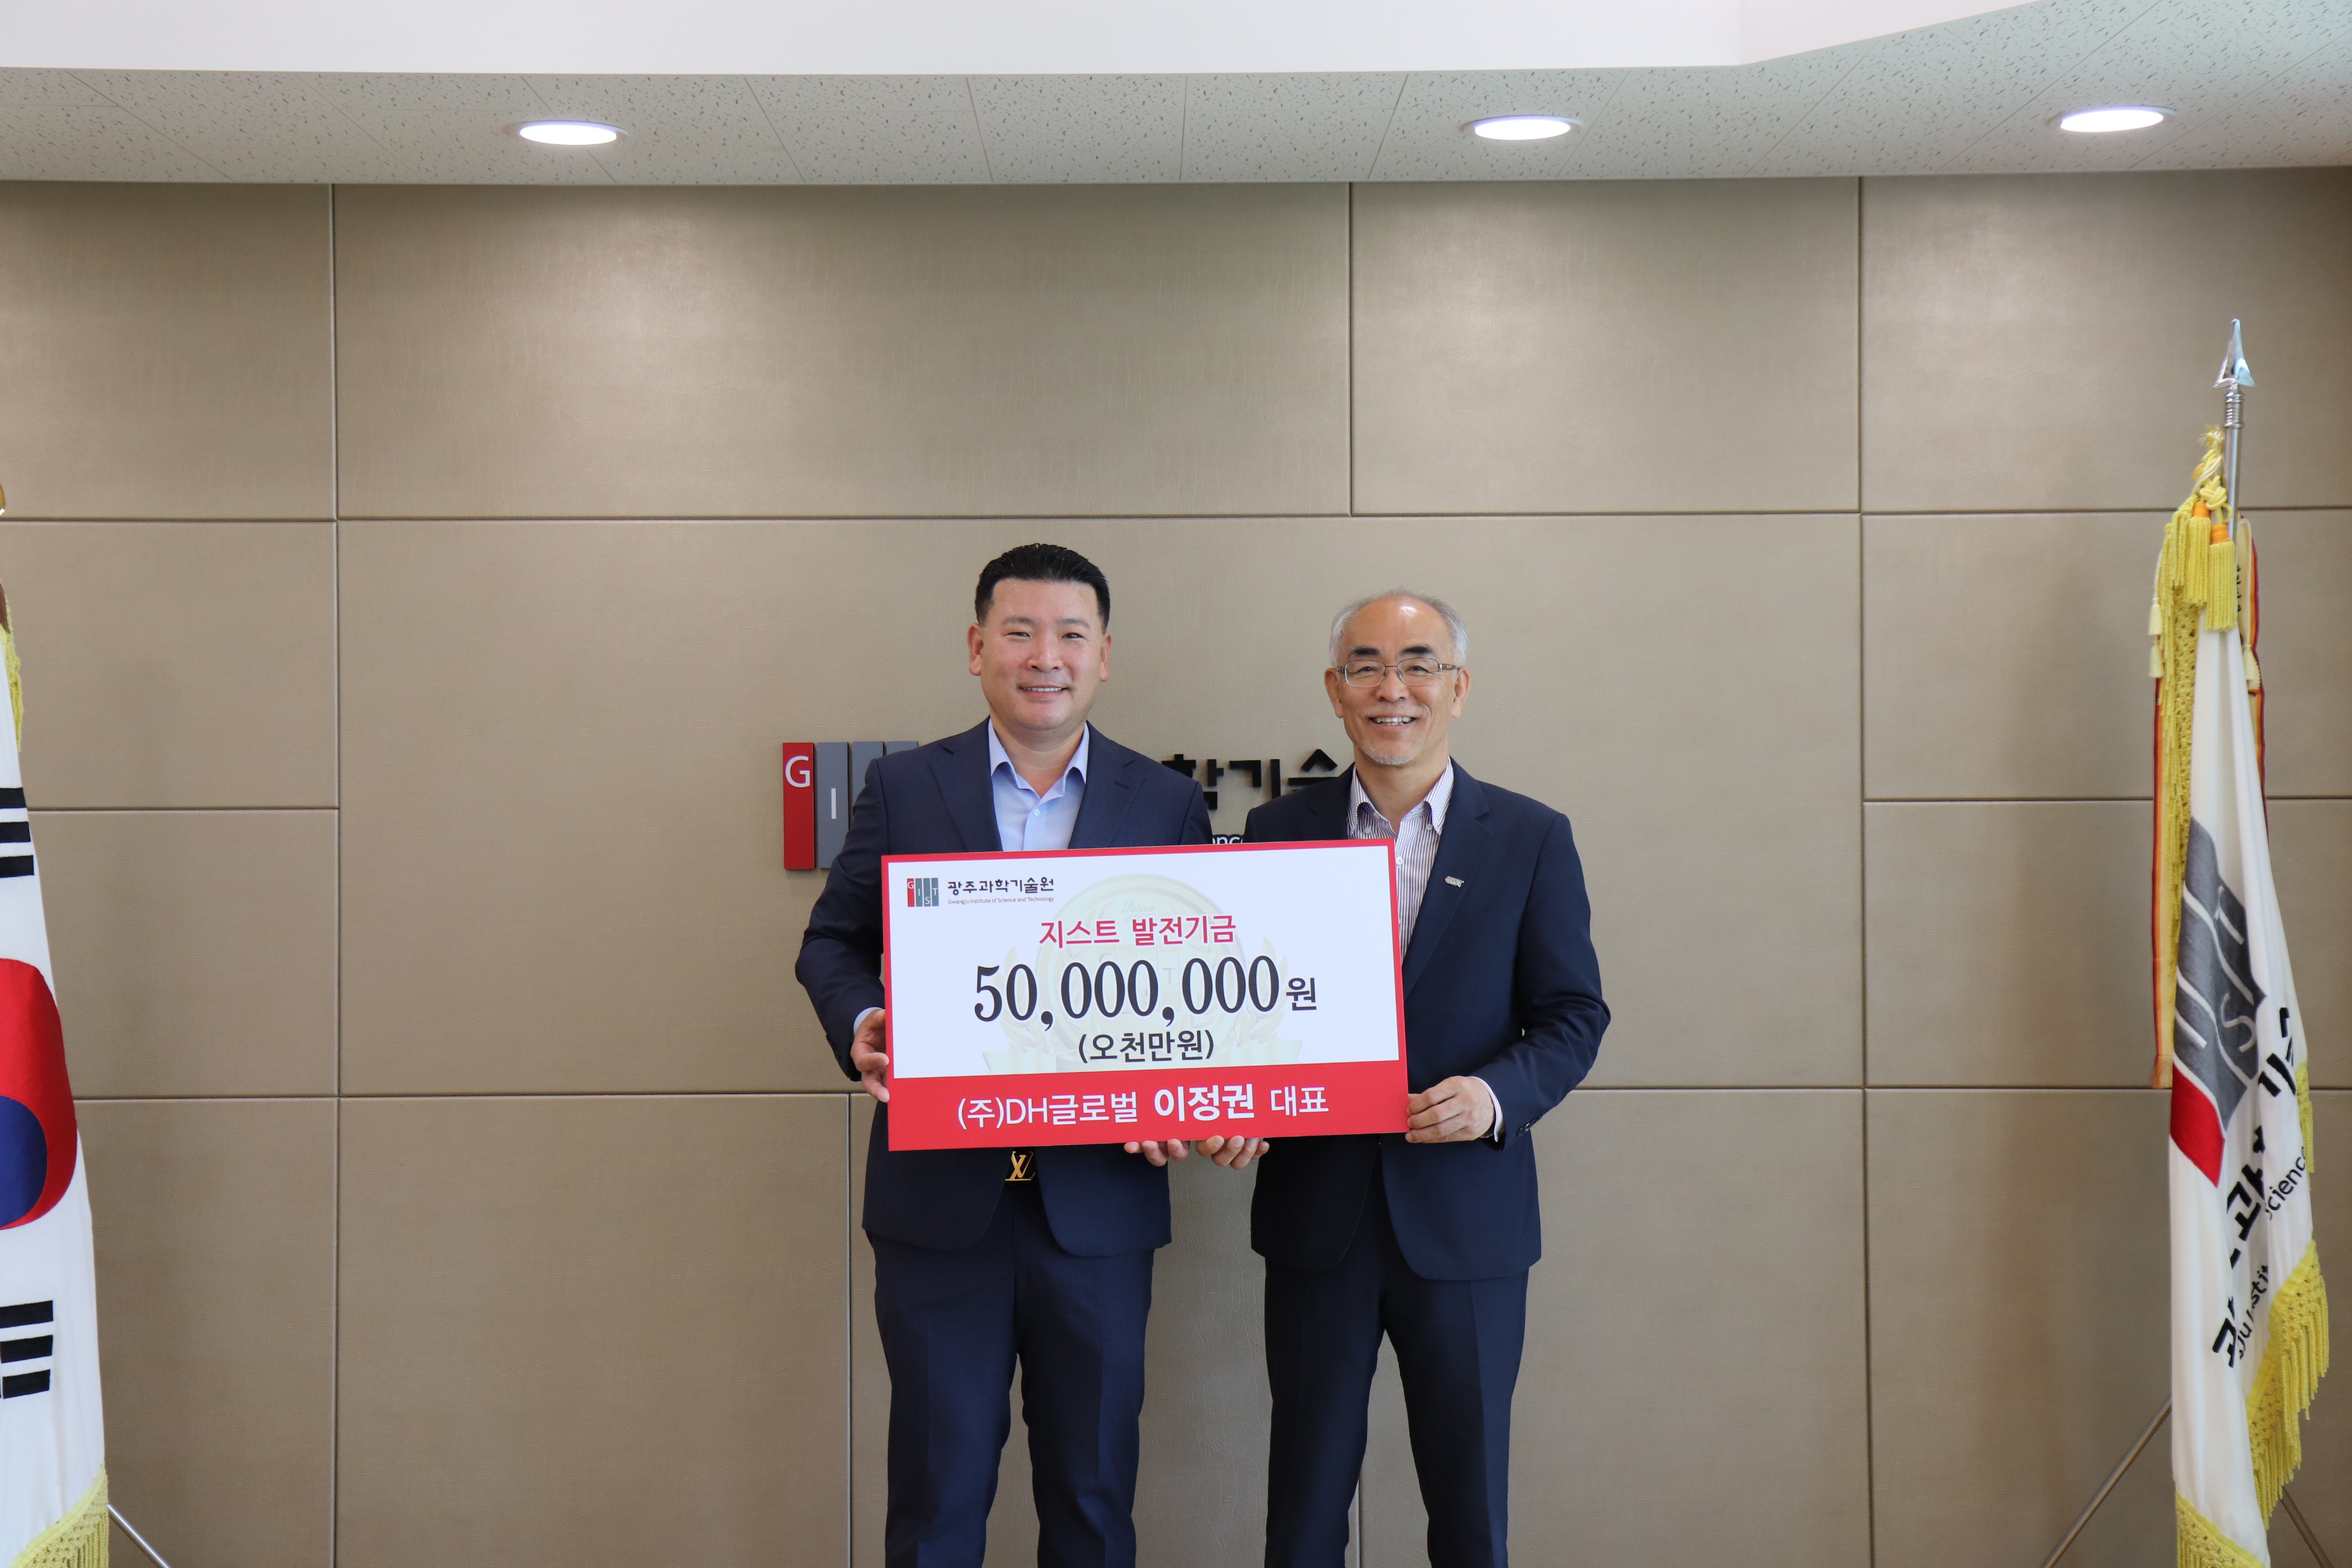 DH Global CEO Jung-kwon Lee donates 50 million won to the GIST Development Fund 이미지